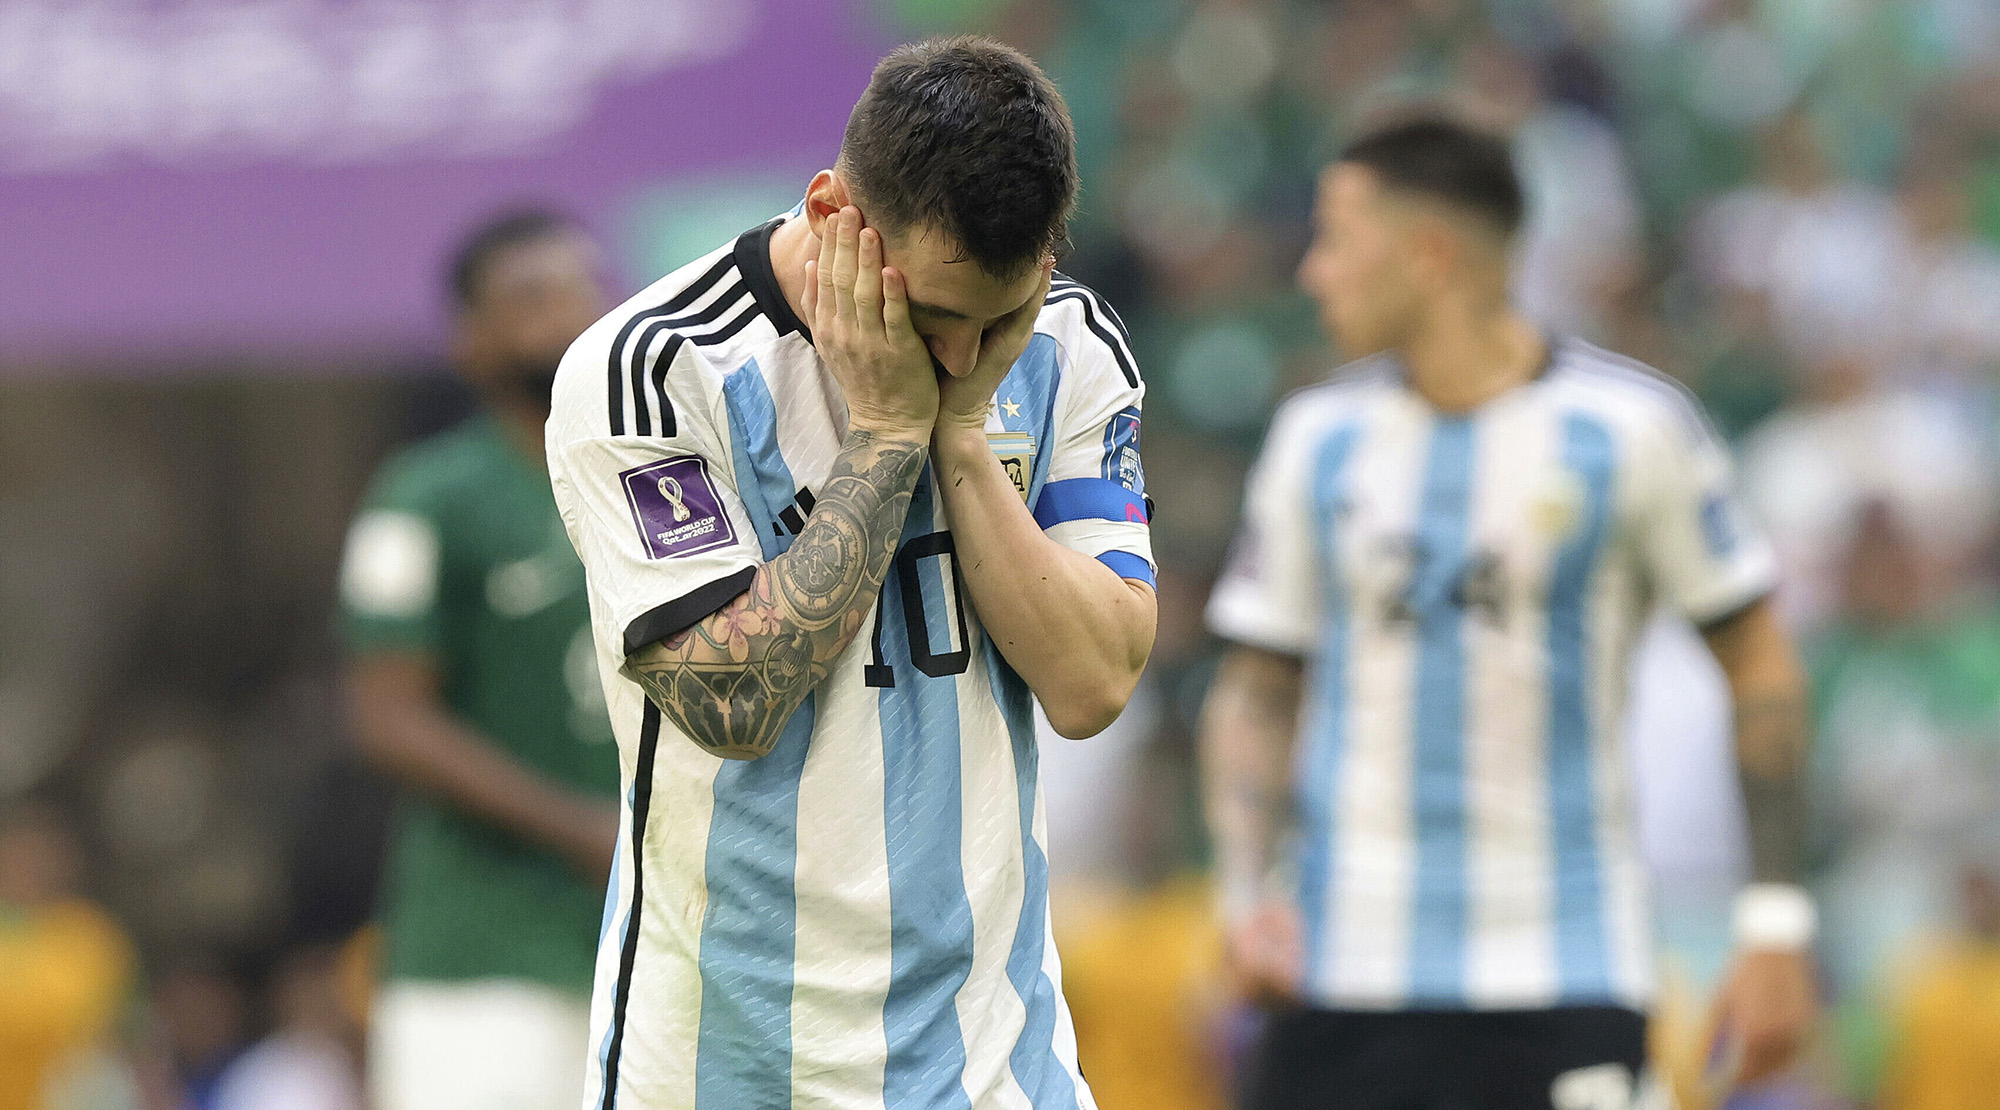 Lionel Messi after losing to Saudi Arabia at the 2022 World Cup in Qatar on November 22.